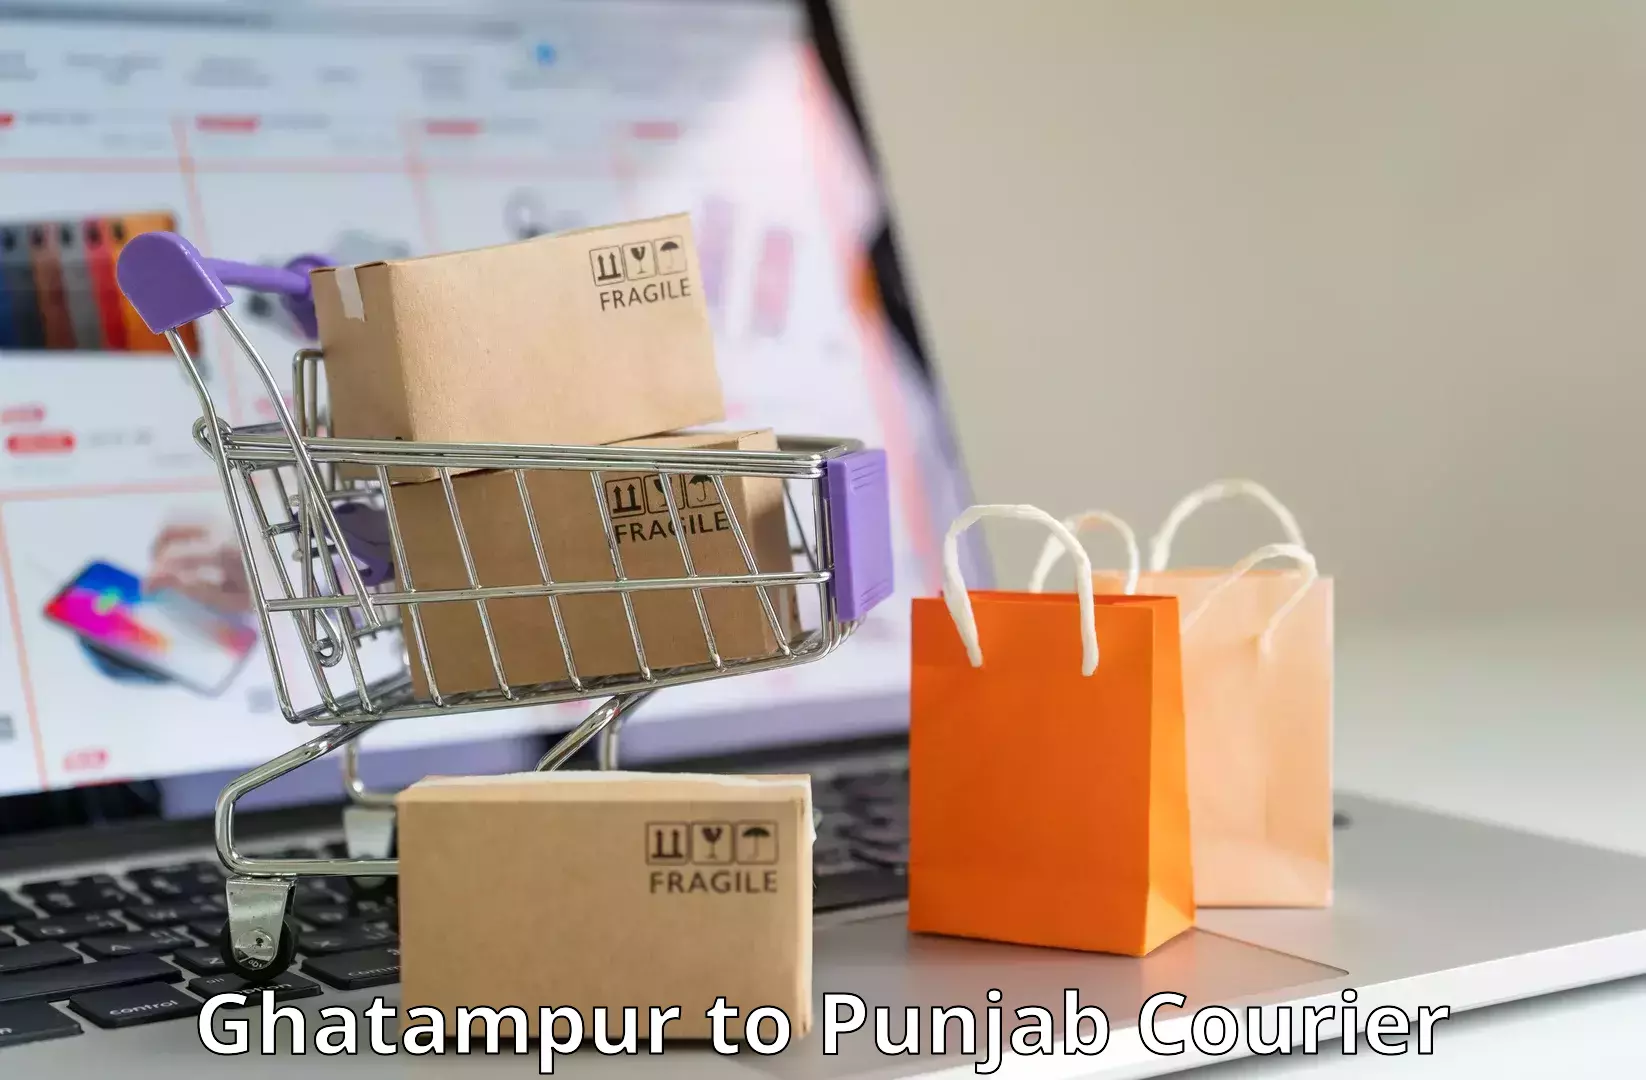 Courier tracking online Ghatampur to Punjab